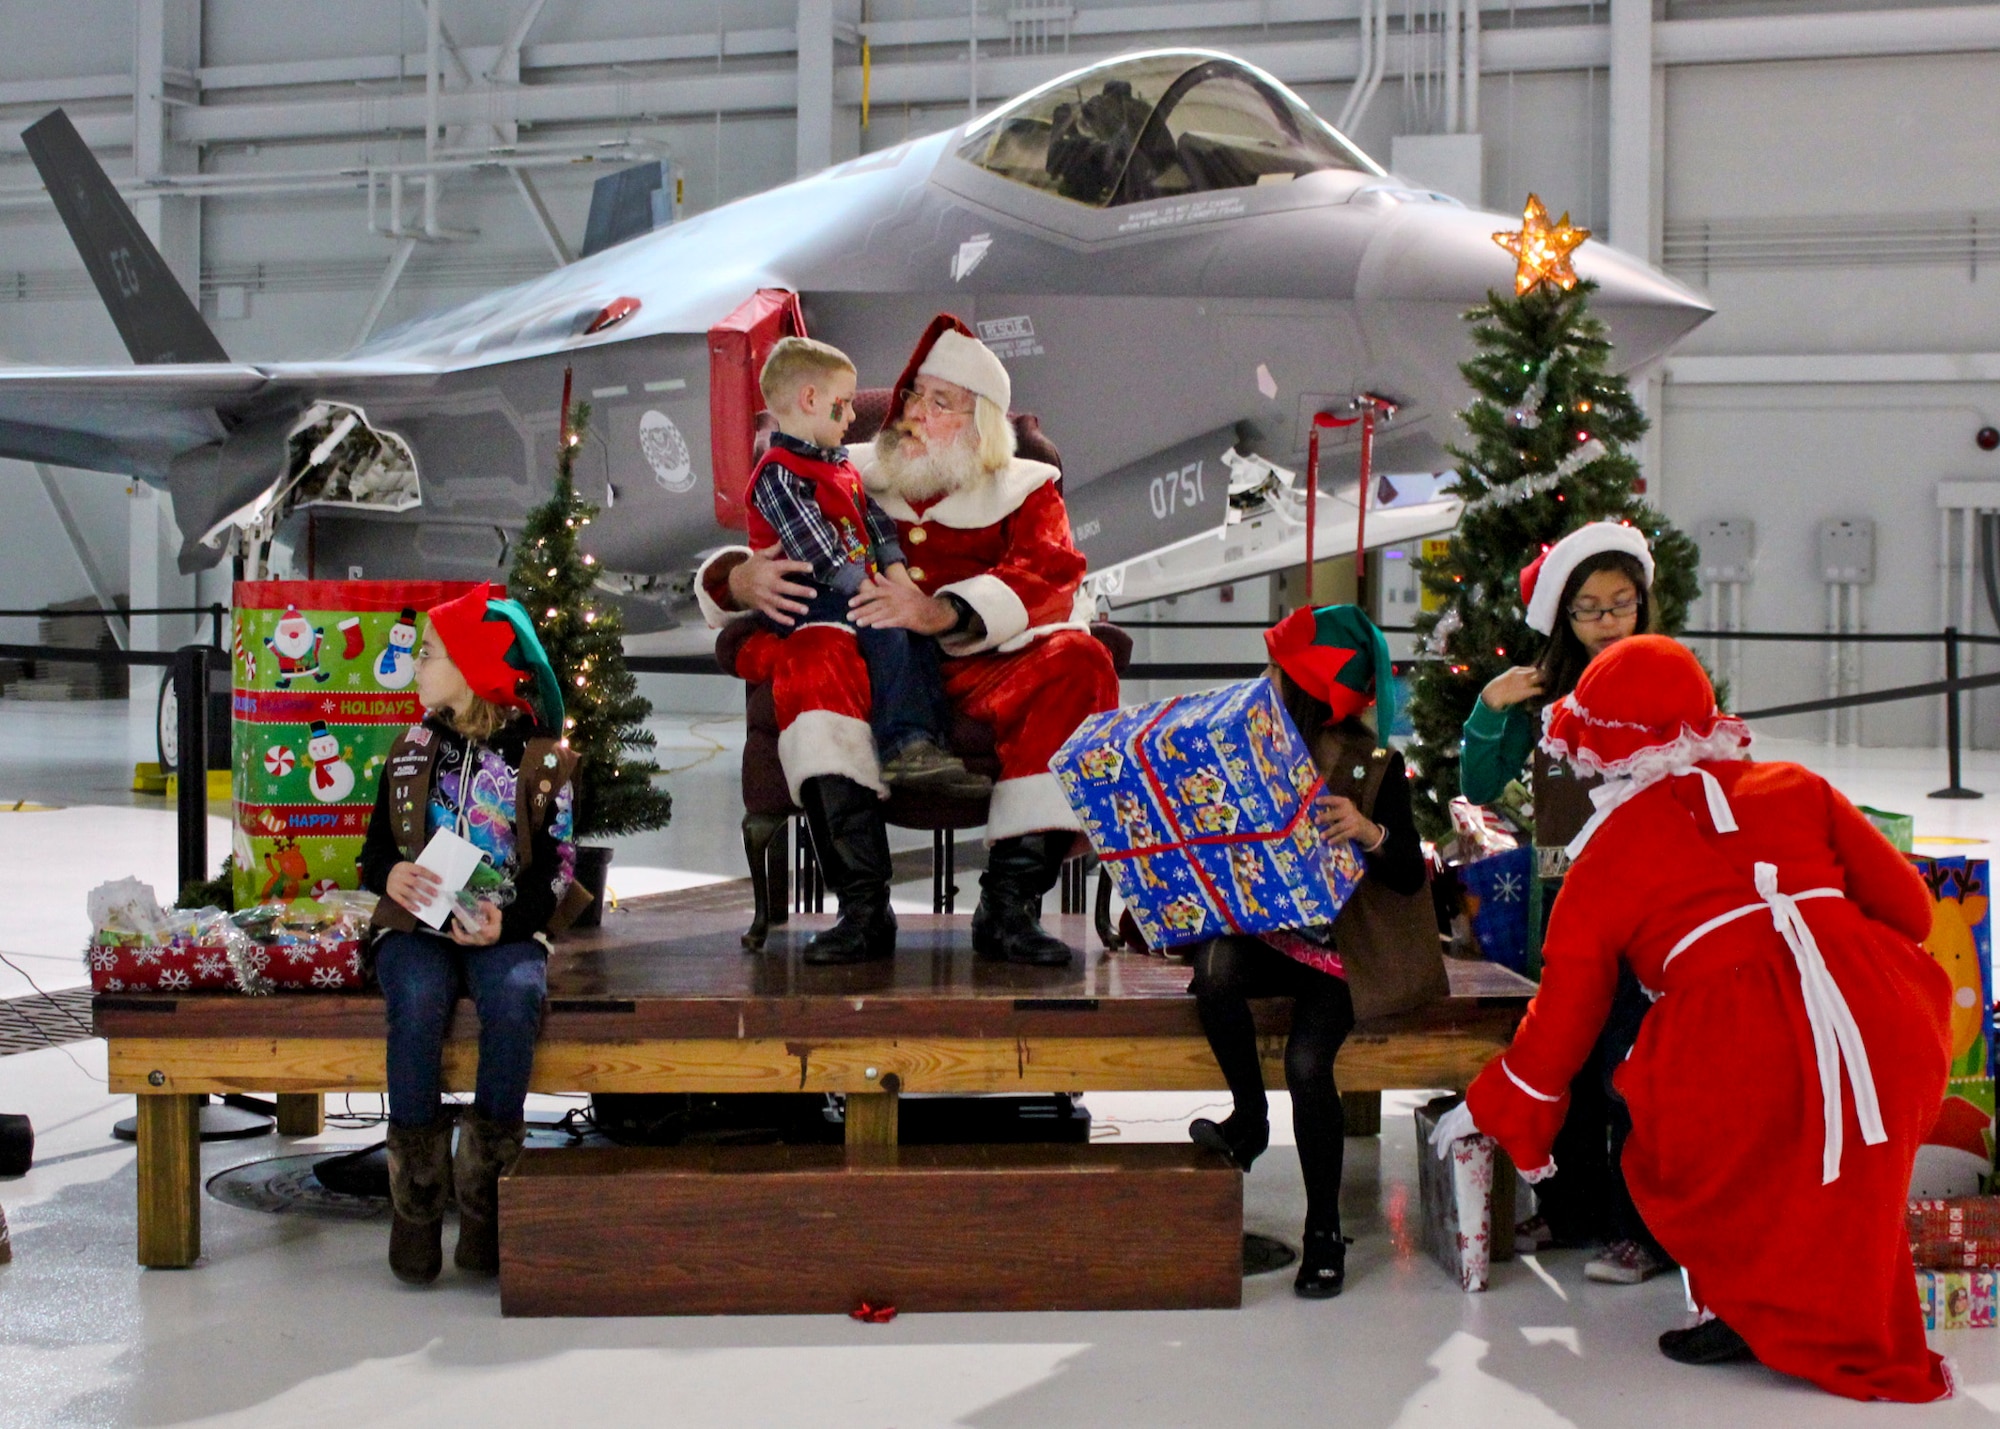 About 240 military and civilian parents from the Navy, Marine Corps and Air Force and their children from across the 33d Fighter Wing gathered for the wing's children’s Christmas party Dec. 10 at Eglin Air Force Base, Fla.  (U.S. Air Force photo/Dianne Bitzes)
